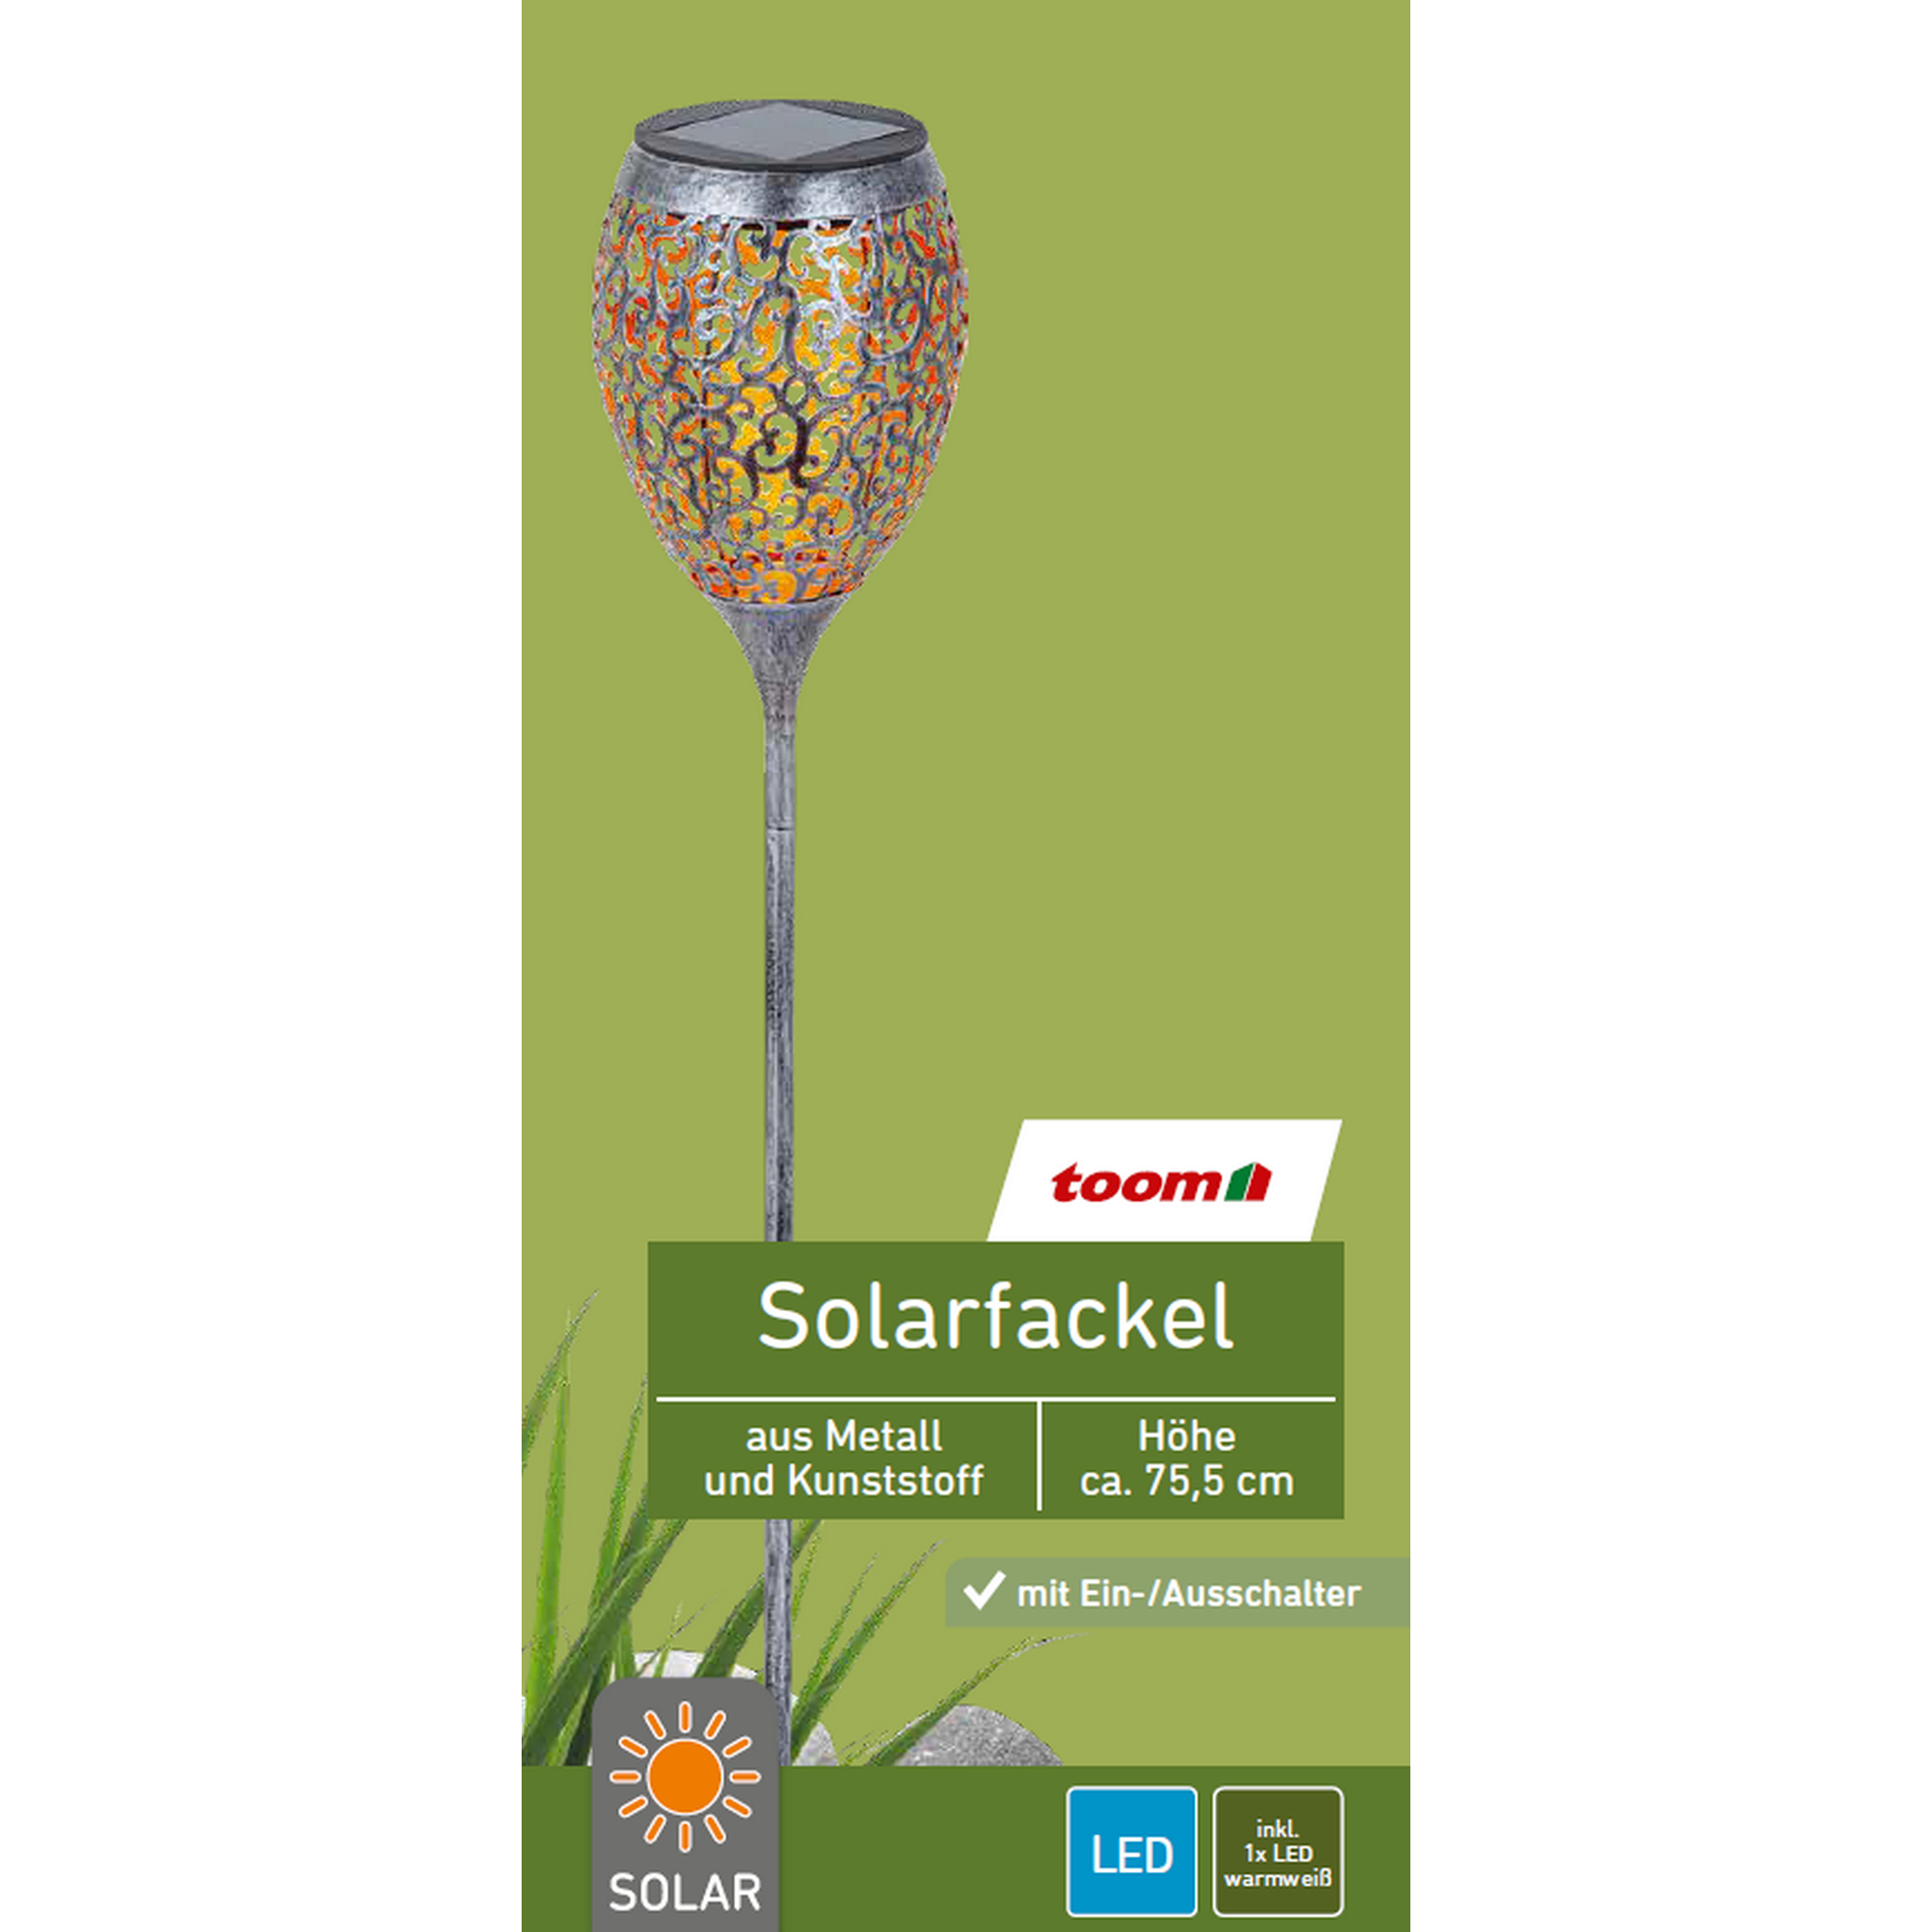 Solarfackel silbern/gold Ø 12,5 x 75,5 cm + product picture